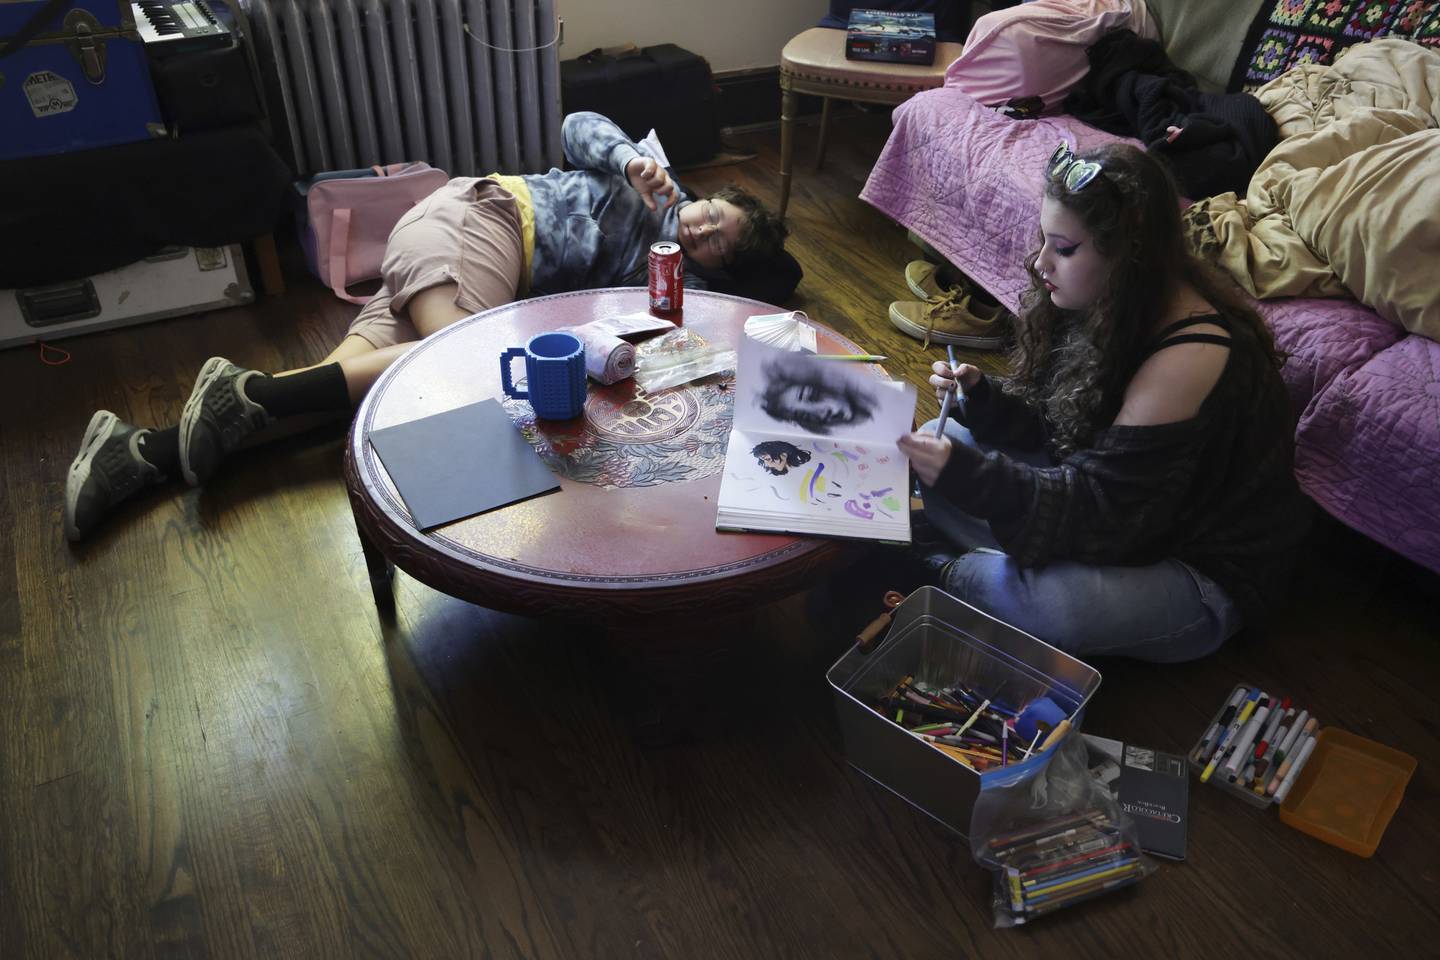 Nehemiah Mejia, 11, left, and his sibling Lourdes Mejia, right, 15, relax in the Chicago home of a family friend on Sept. 30, 2022. The Mejia family, including their mother and another sibling, was displaced from Florida by Hurricane Ian. Lourdes is drawing with donated art supplies. 